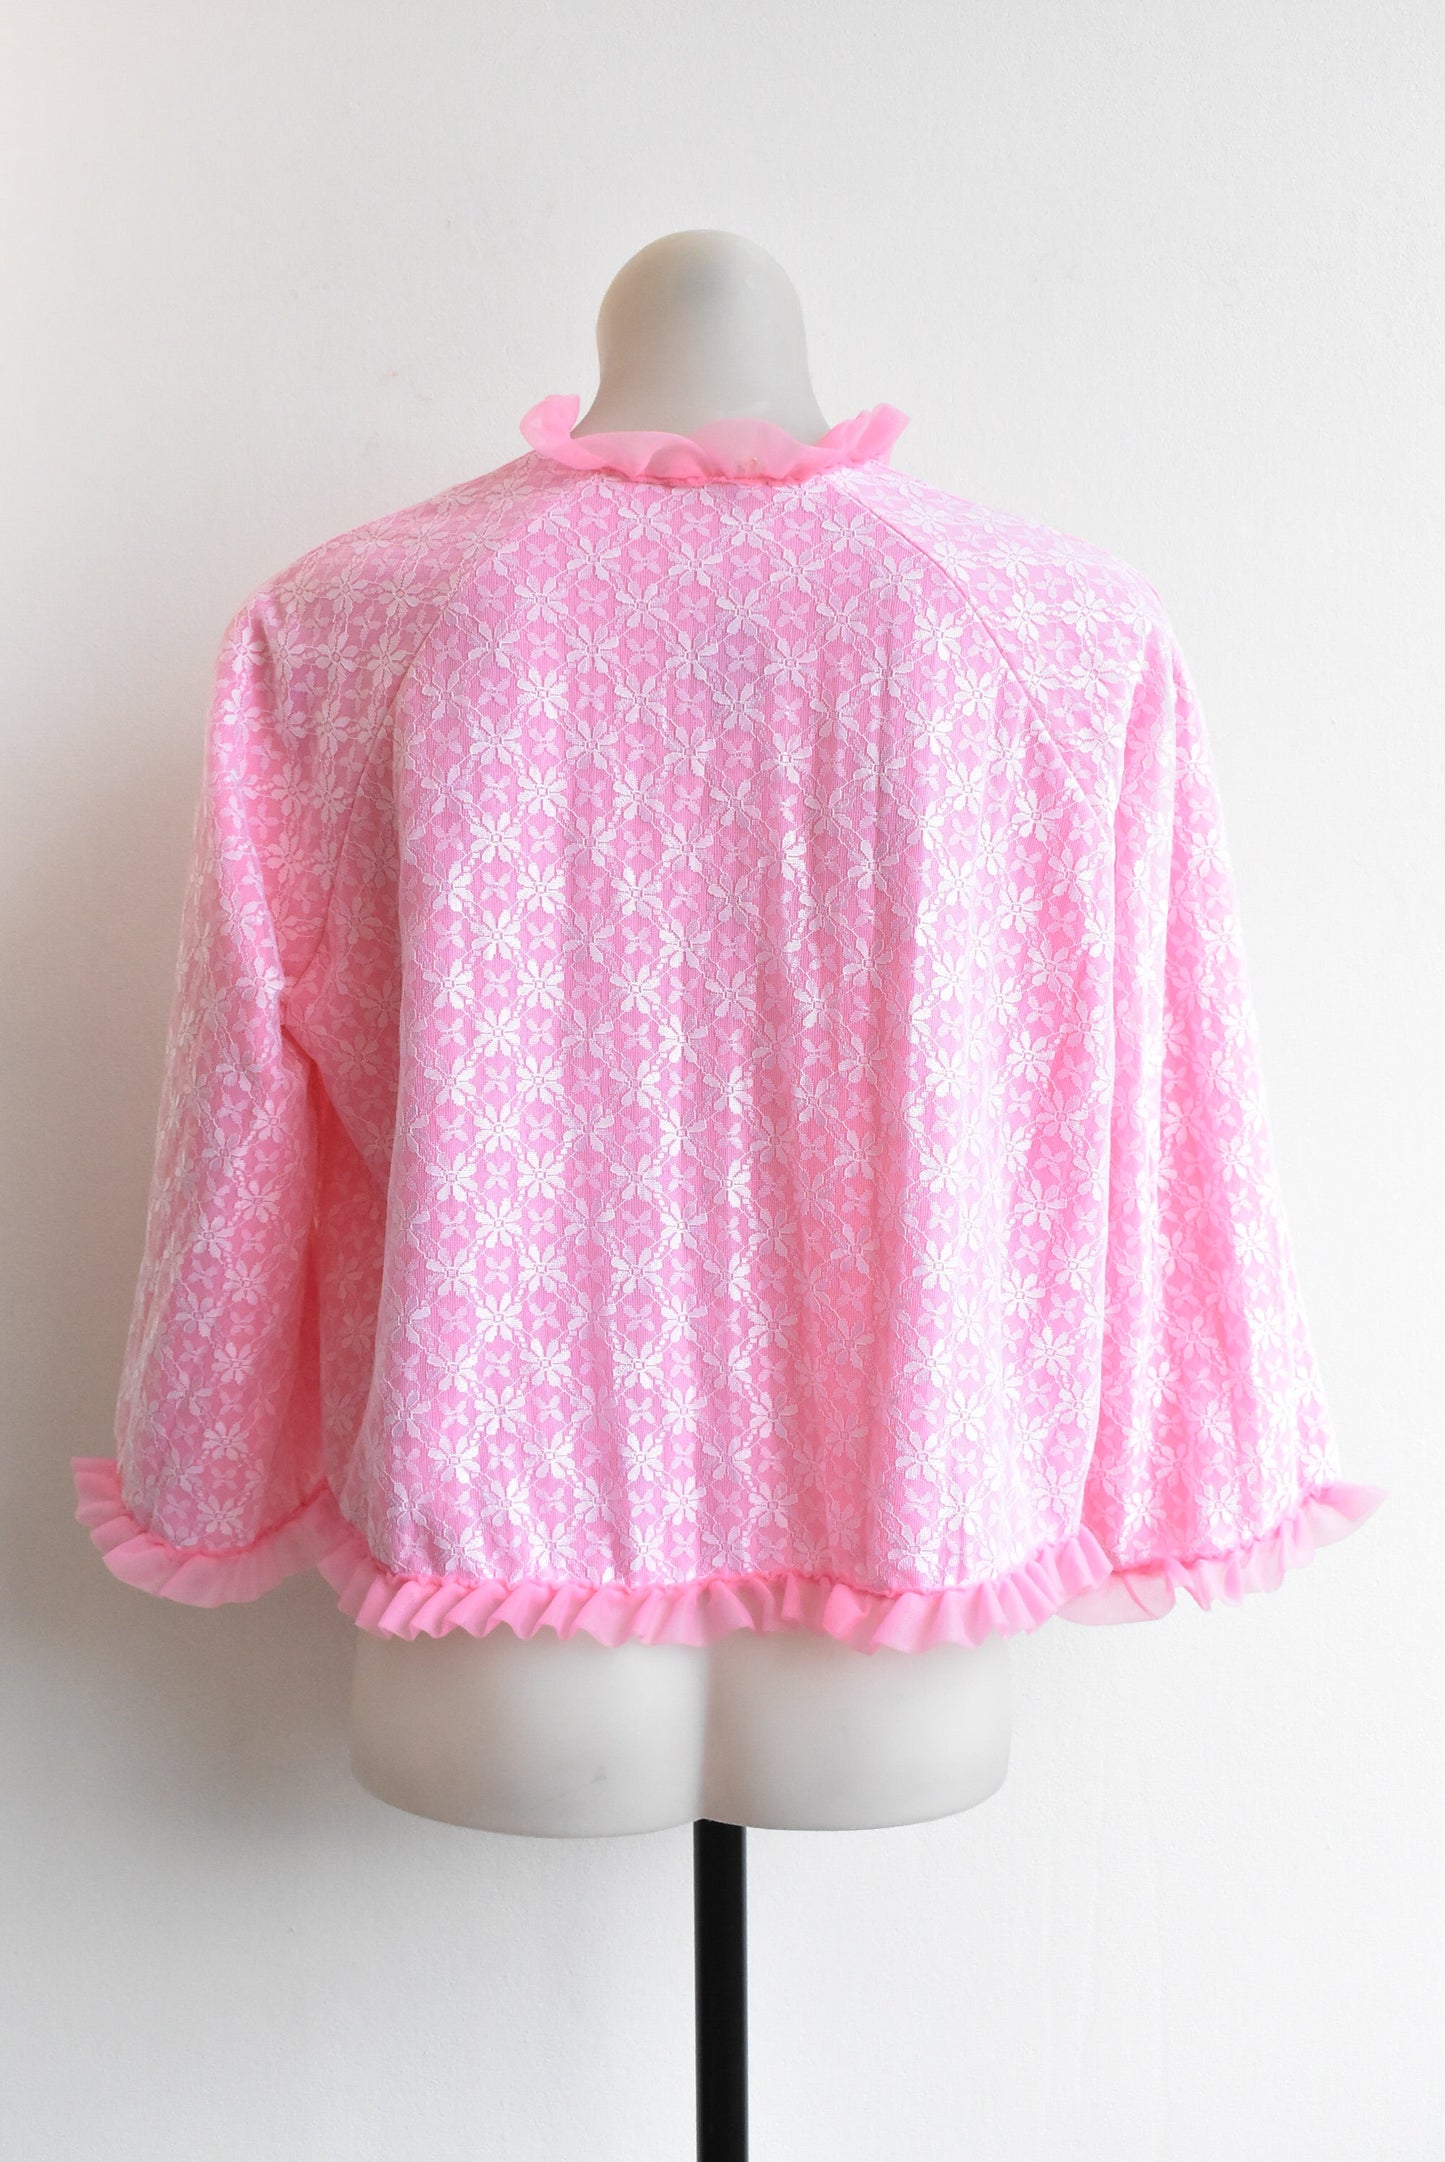 Bed cape/ jacket, May Belle, Lacy pink, vintage, M